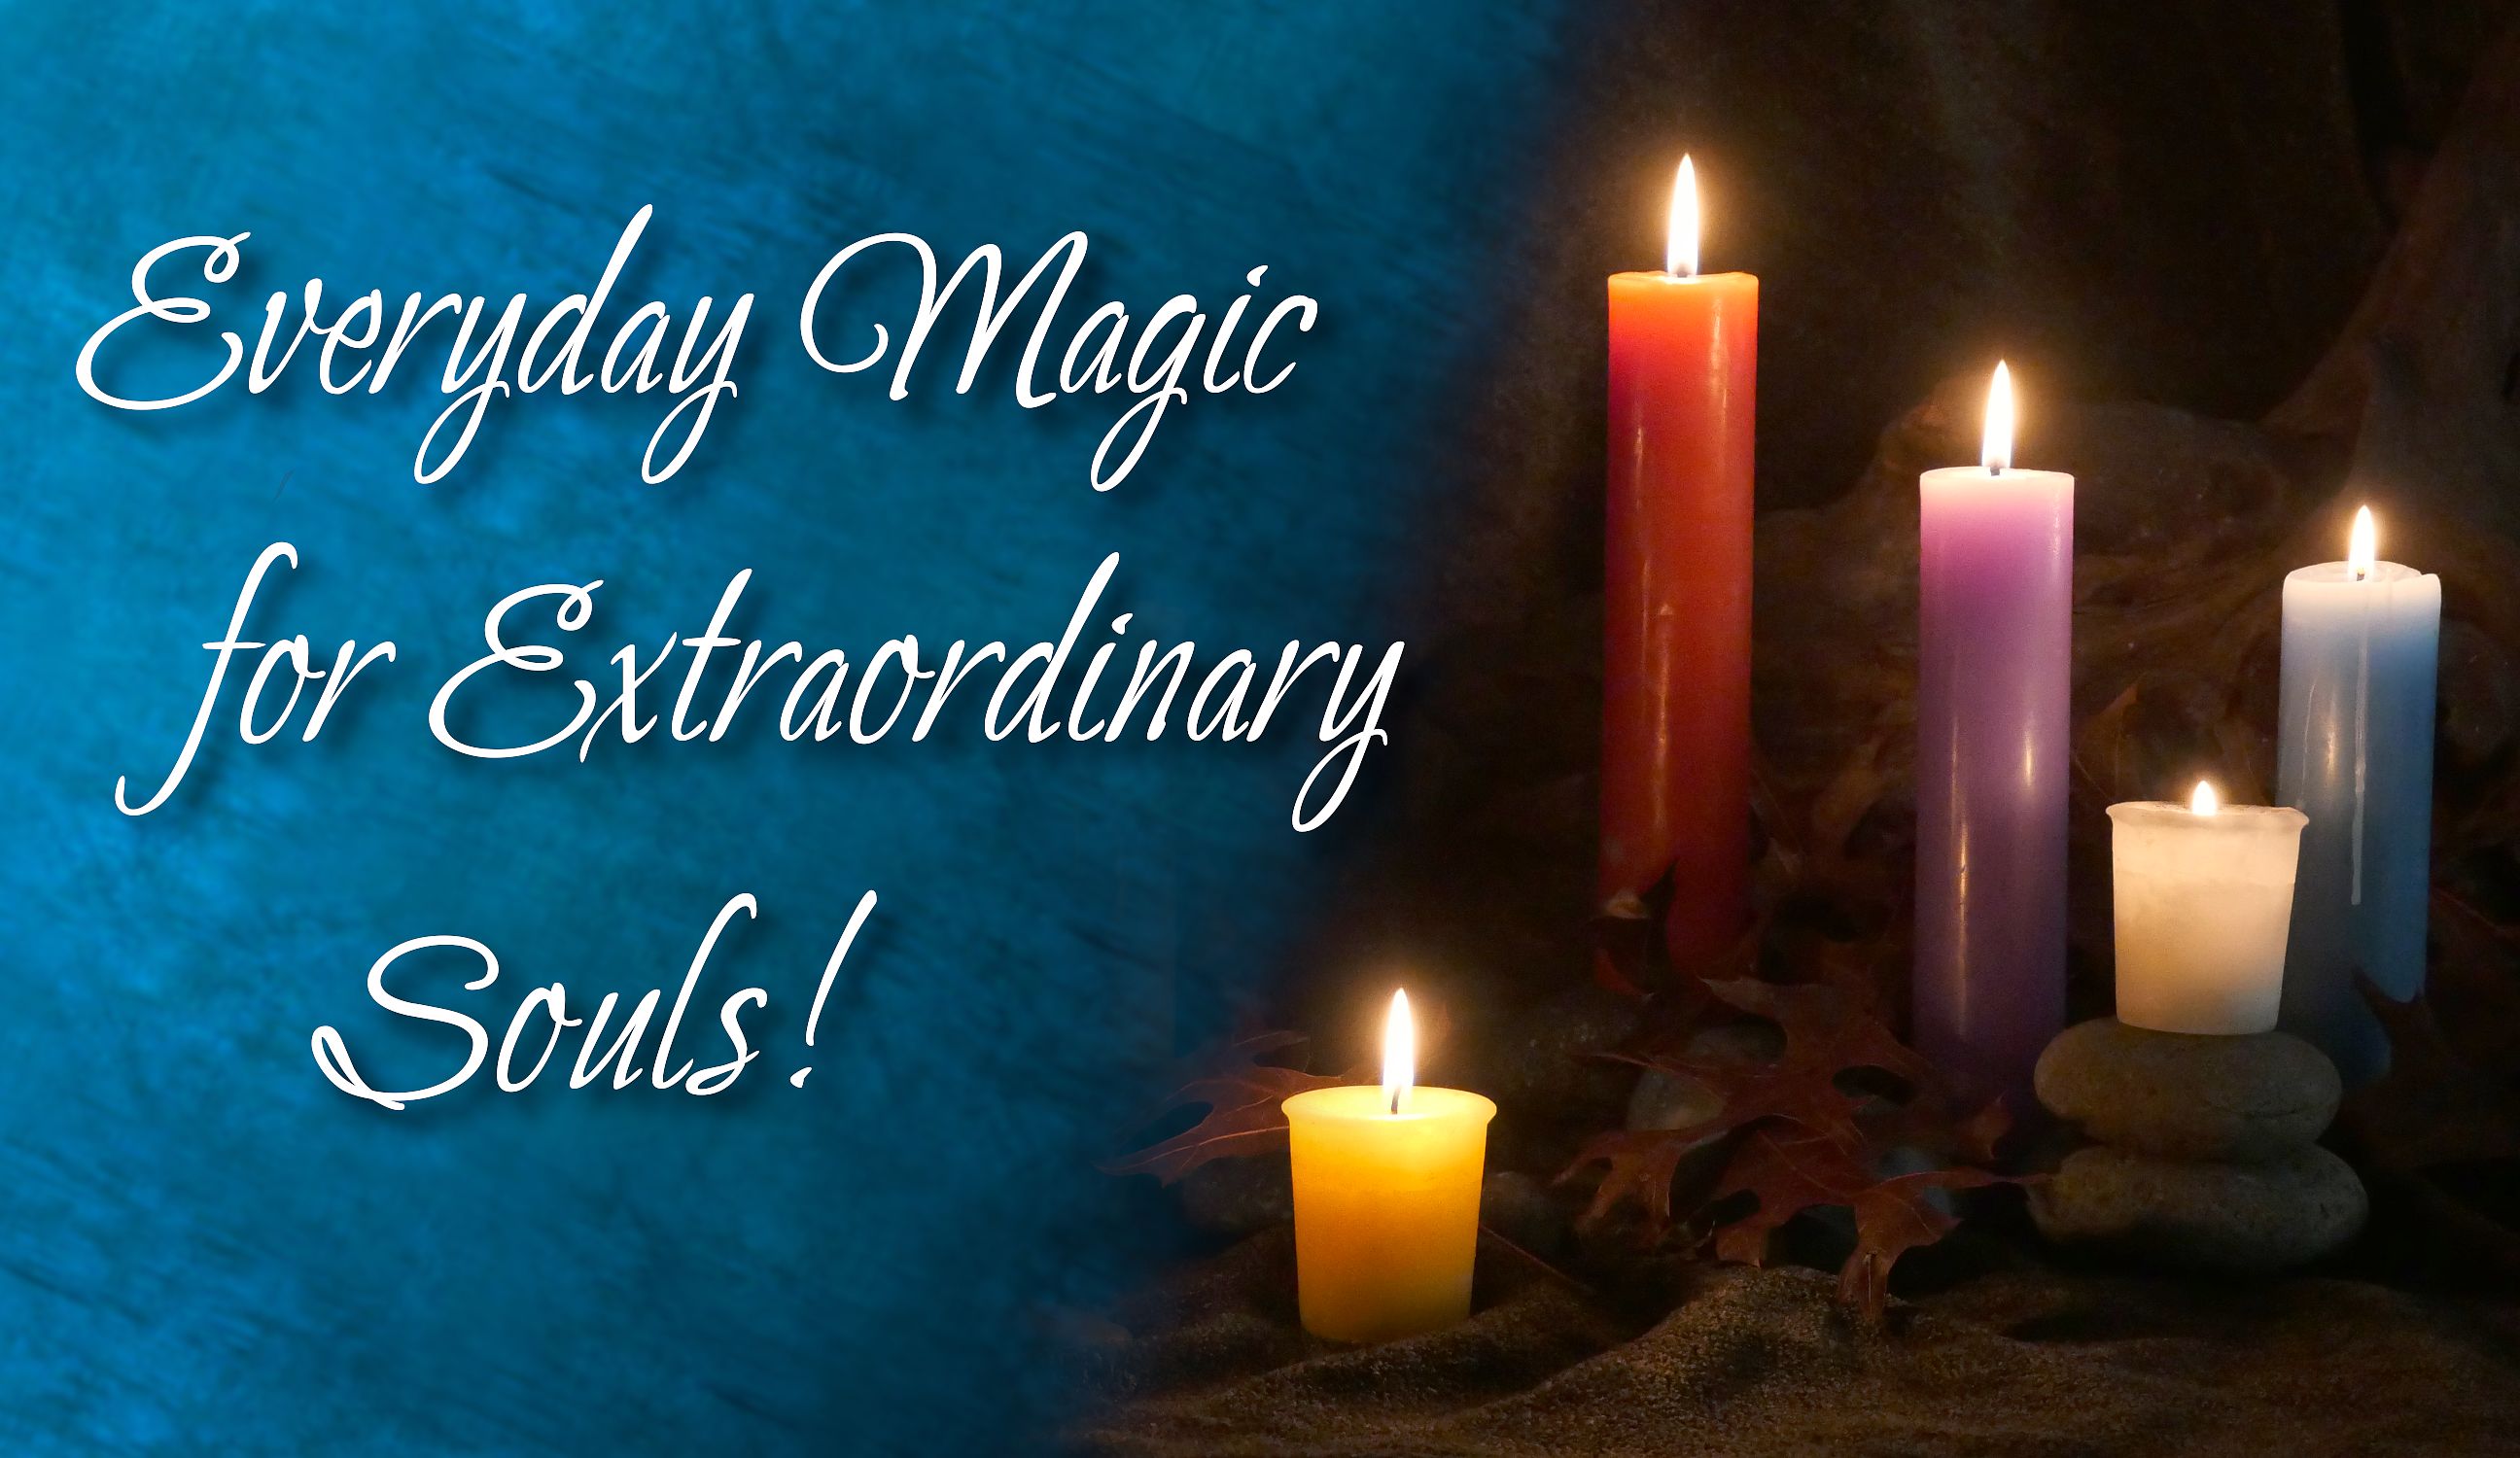 An array of lit candles. Text reads 'Everyday Magic for Extraordinary Souls! Your source of everyday magic for over 25 years'